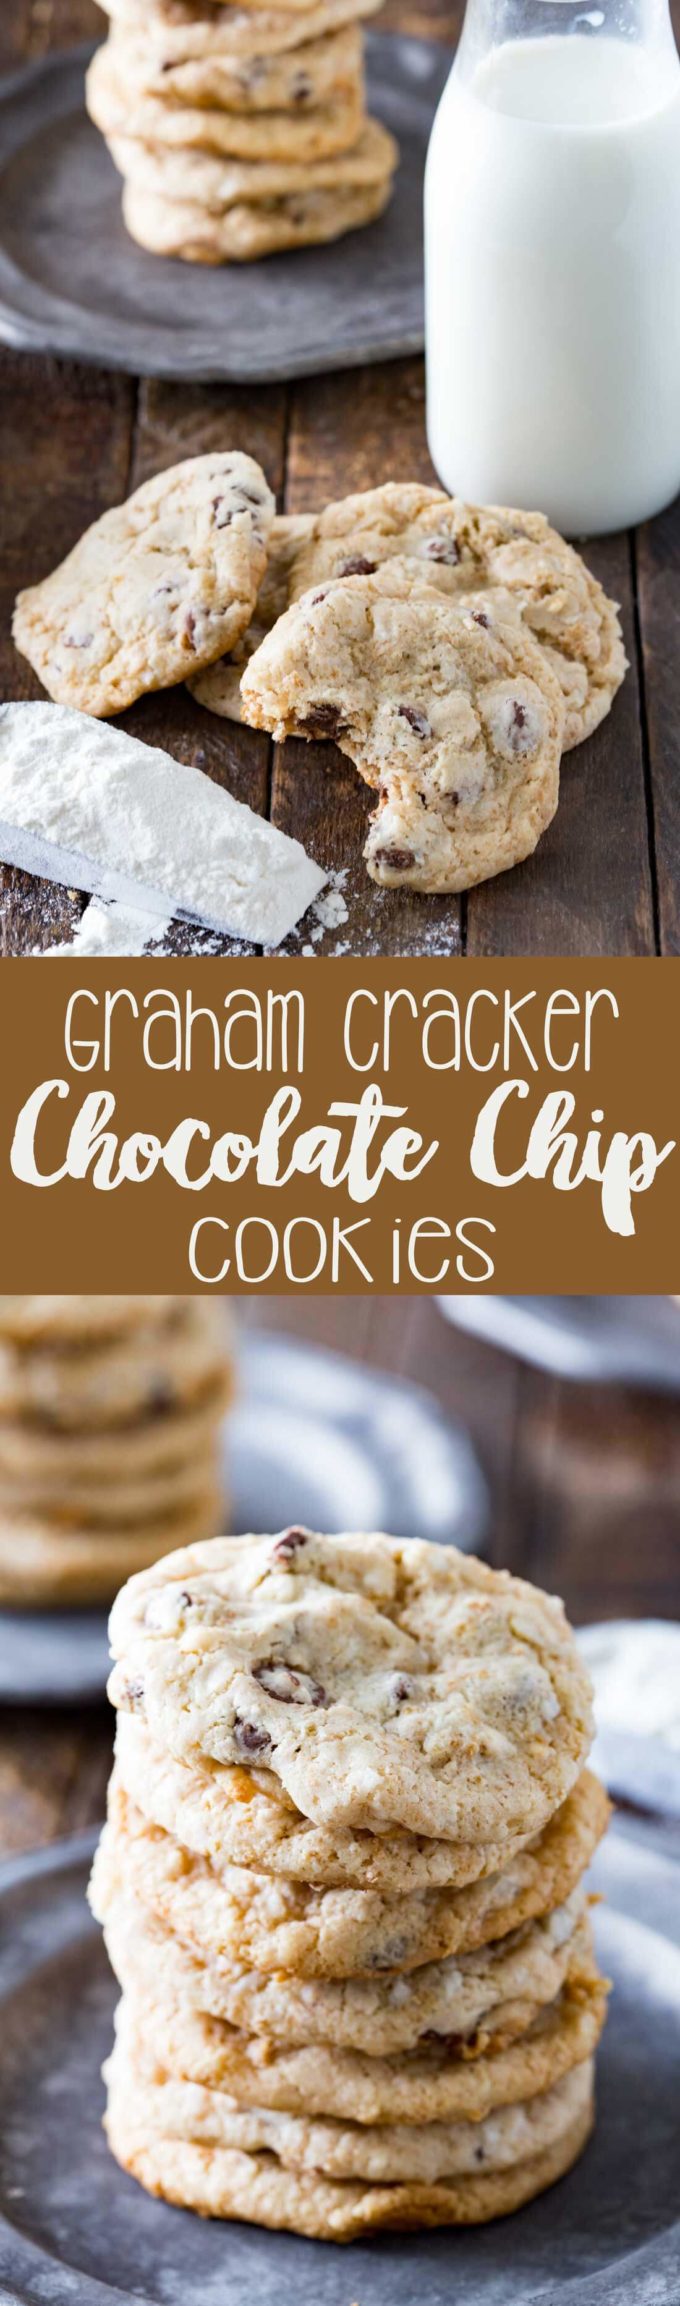 Easy, crispy outside, soft inside, these graham cracker chocolate chip cookies are the best